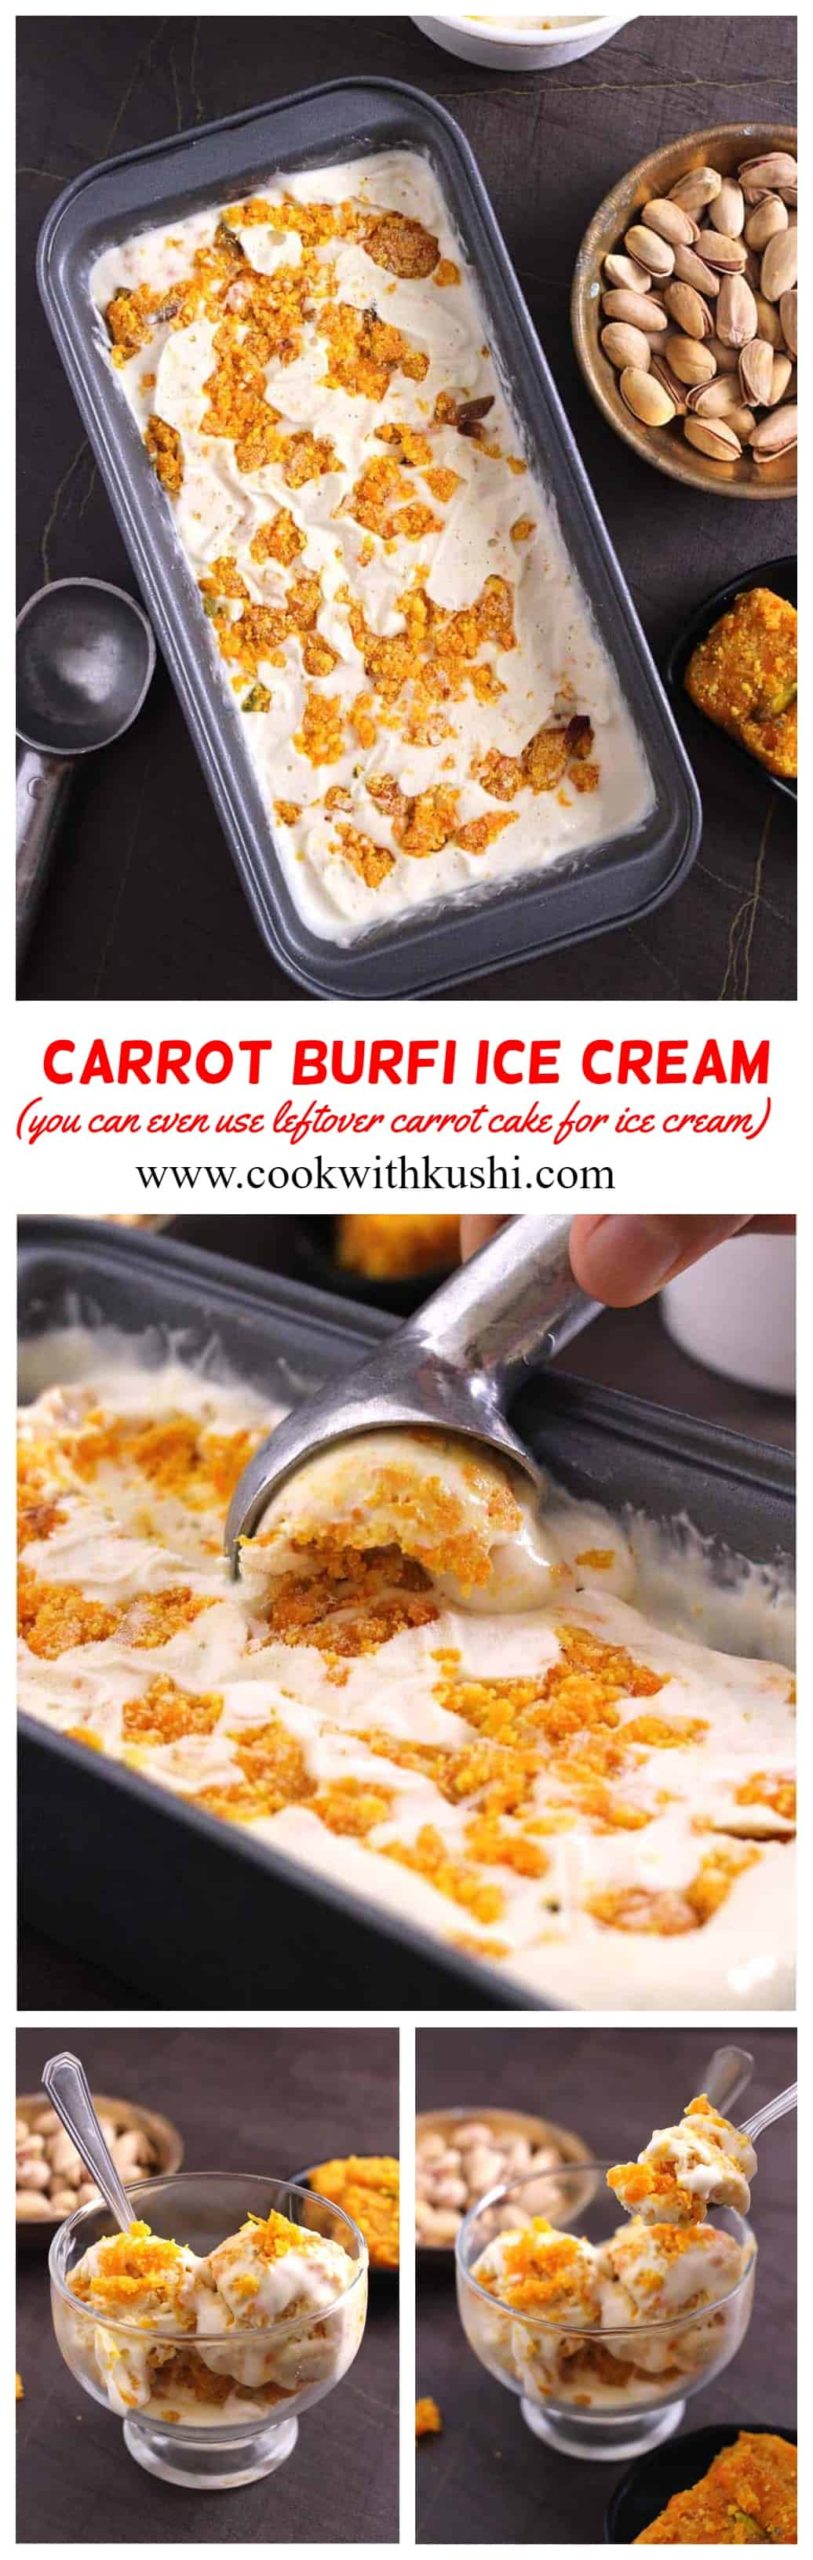 Carrot Burfi Ice Cream is soft and melt in mouth ice cream with new refreshing flavor that you should not miss to try this summer or festive season!!! #burfi #barfi #icecream #eggless #Nochurn #diwali